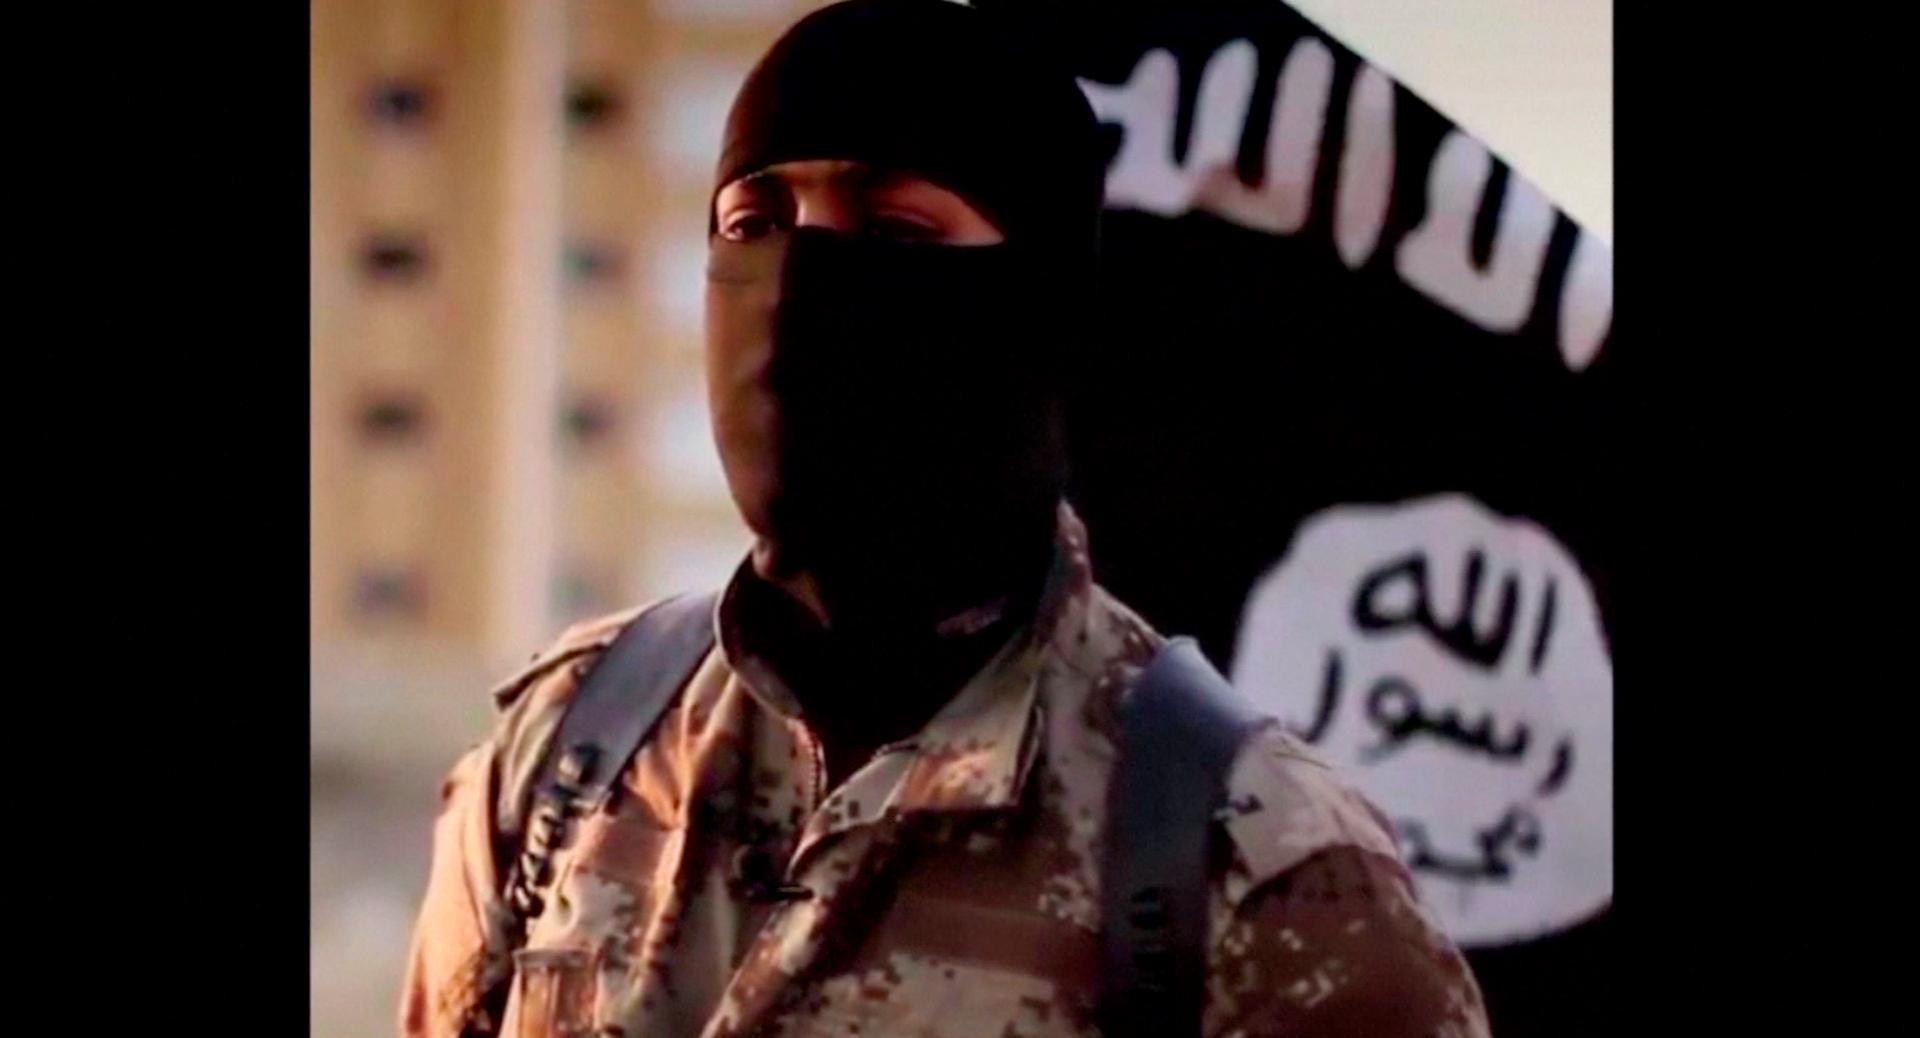 A masked man speaking in what is believed to be a North American accent is pictured in a video that ISIS militants released in September 2014.